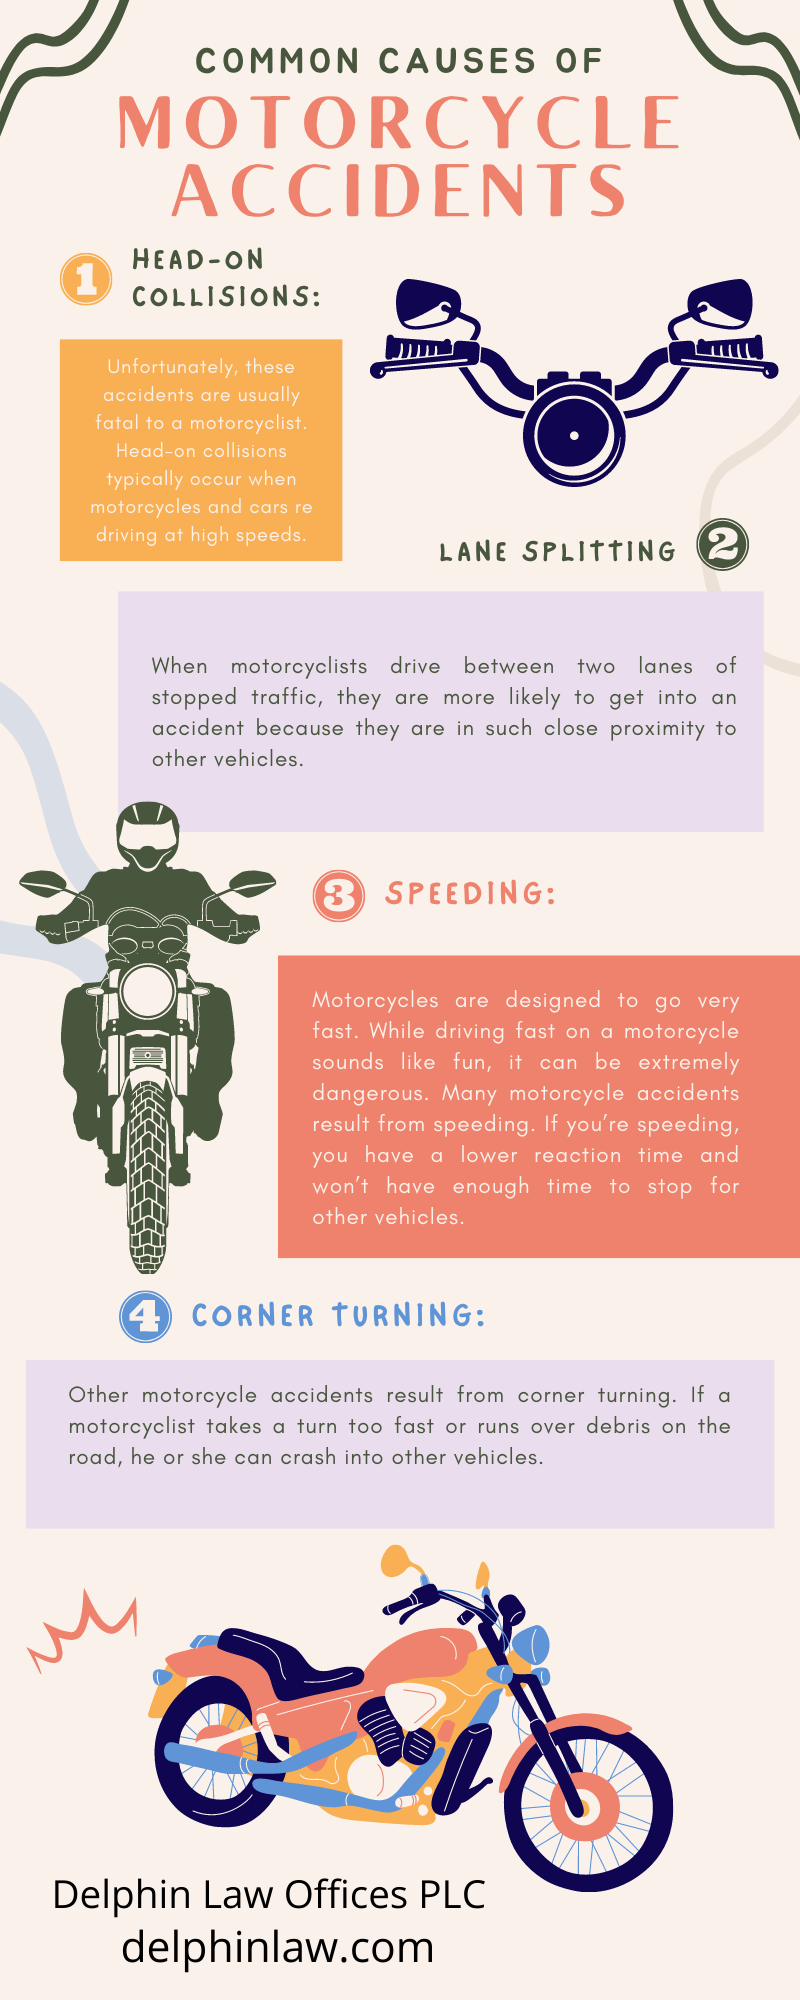 COMMON CAUSES OF MOTORCYCLE ACCIDENTS Infographic